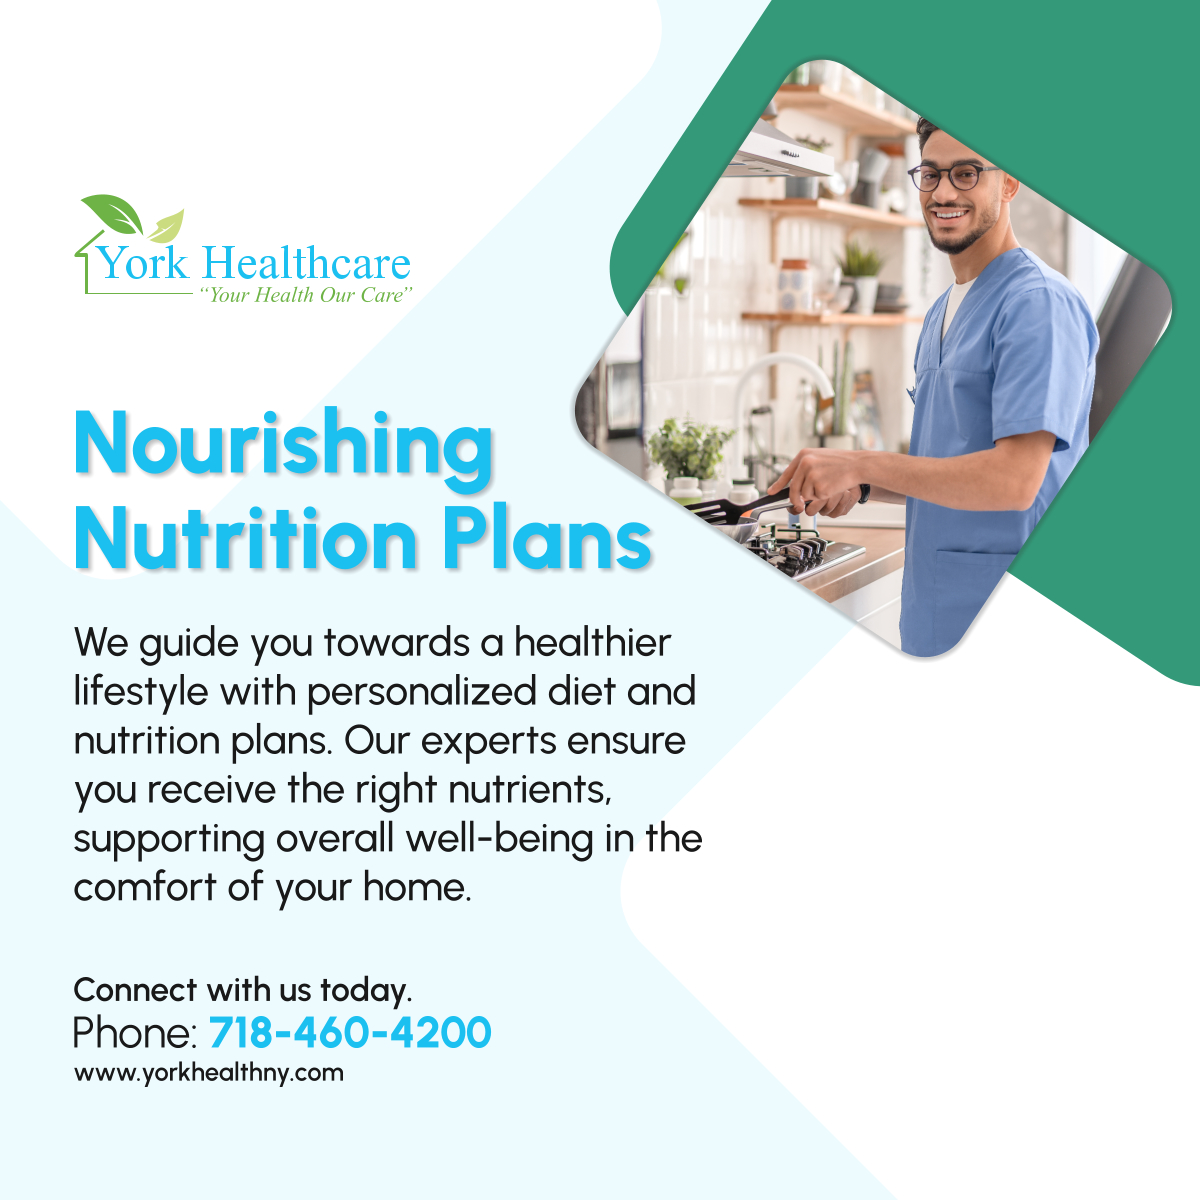 Discover the benefits of a tailored nutrition plan. Our goal is to enhance your health and vitality through expert guidance. Start your journey to a healthier you today. 

#HealthyNutrition #ElmhurstNewYork #HomeHealthCare #PersonalizedDiet #NutritionGuidance